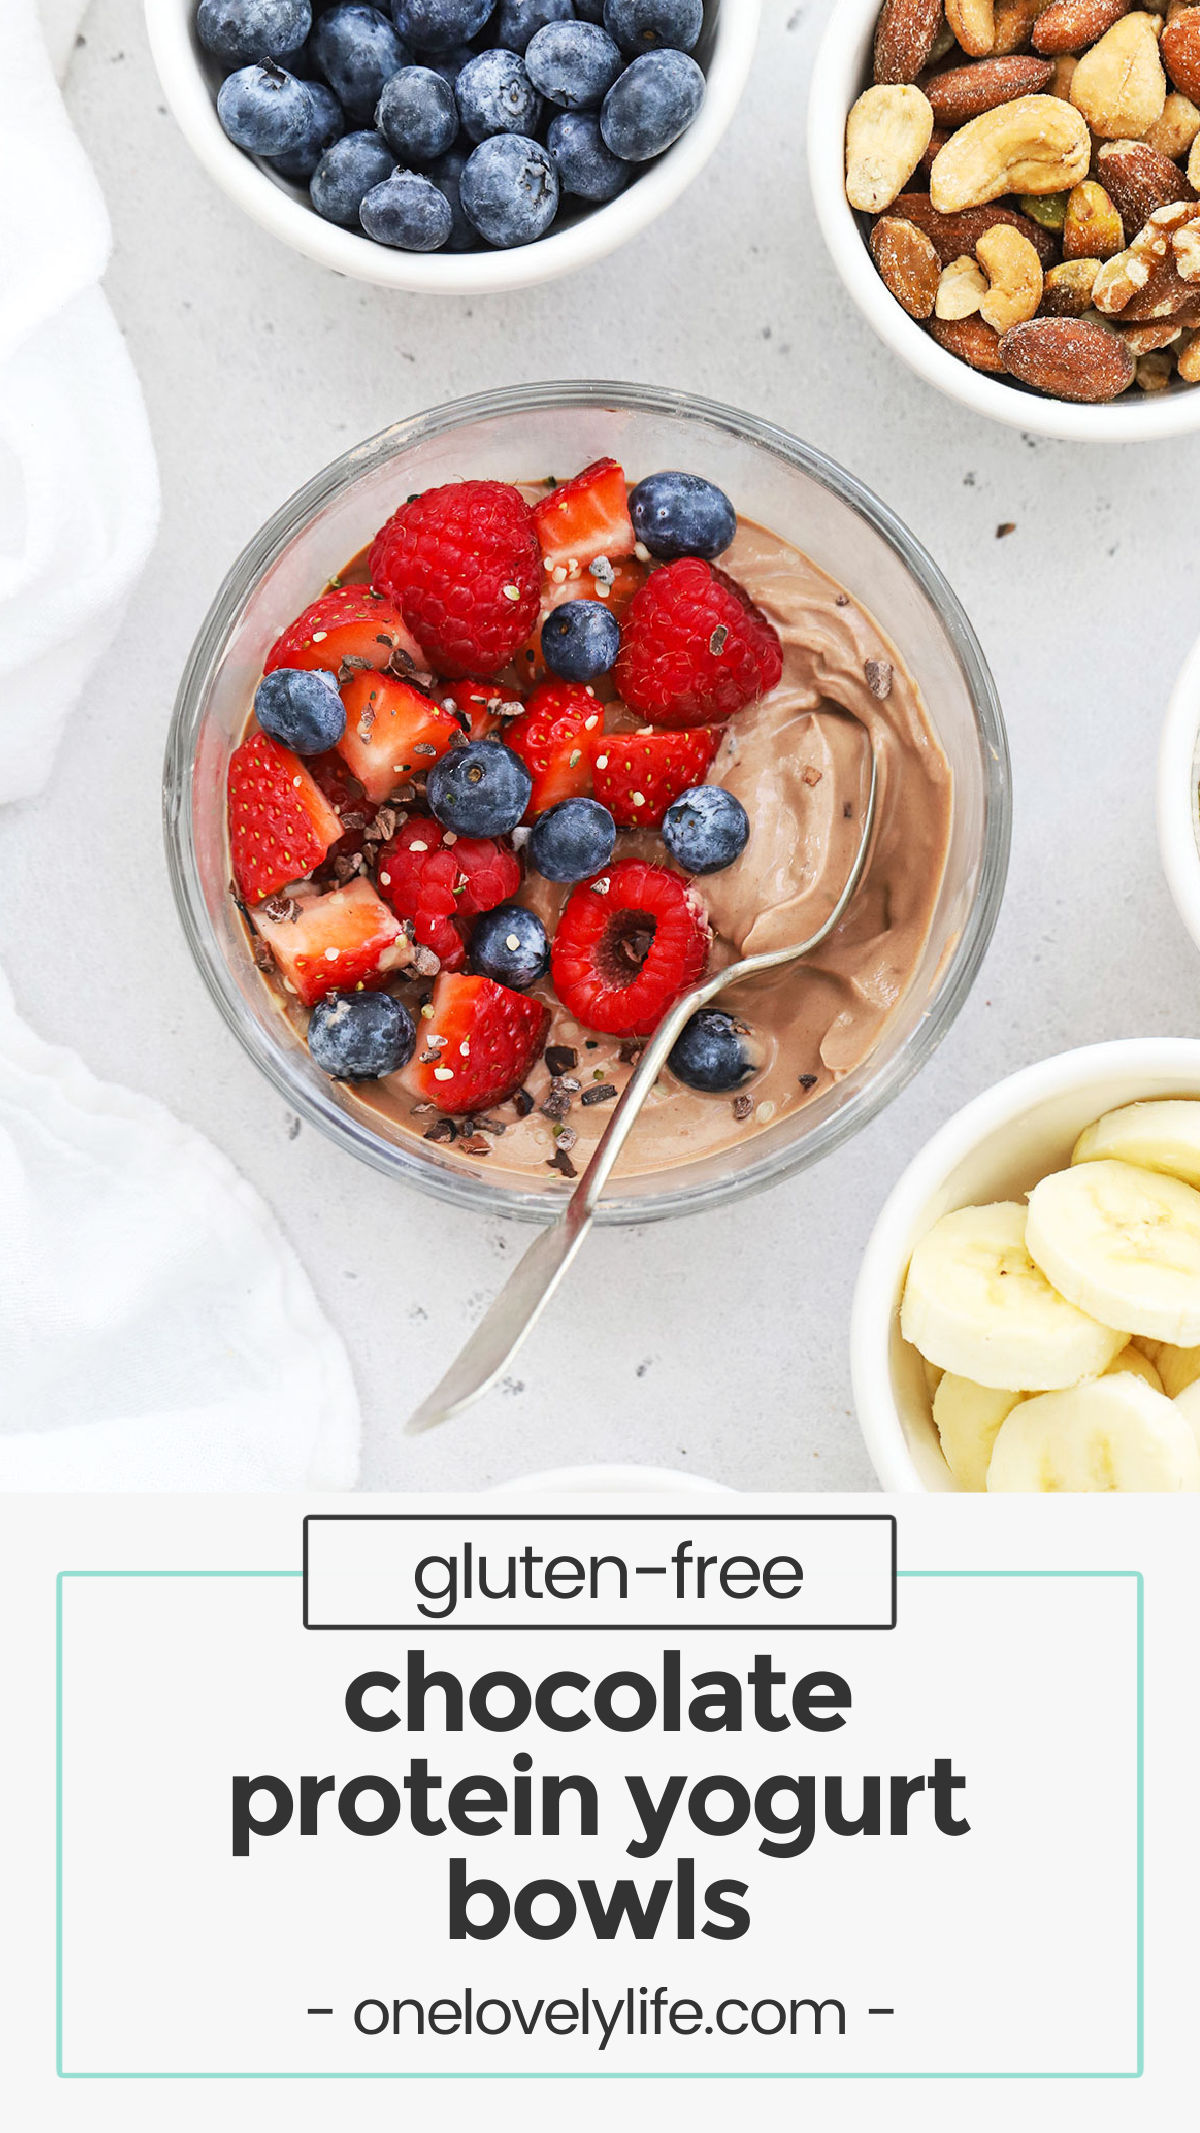 We love this chocolate protein yogurt bowls recipe! It's a delicious high protein breakfast idea--no eggs required! / high protein breakfast without eggs / chocolate yogurt bowl recipe / protein chocolate pudding / high protein yogurt / lactose free chocolate protein powder / healthy breakfast idea / healthy meal prep breakfast / gluten-free breakfast / summer breakfast